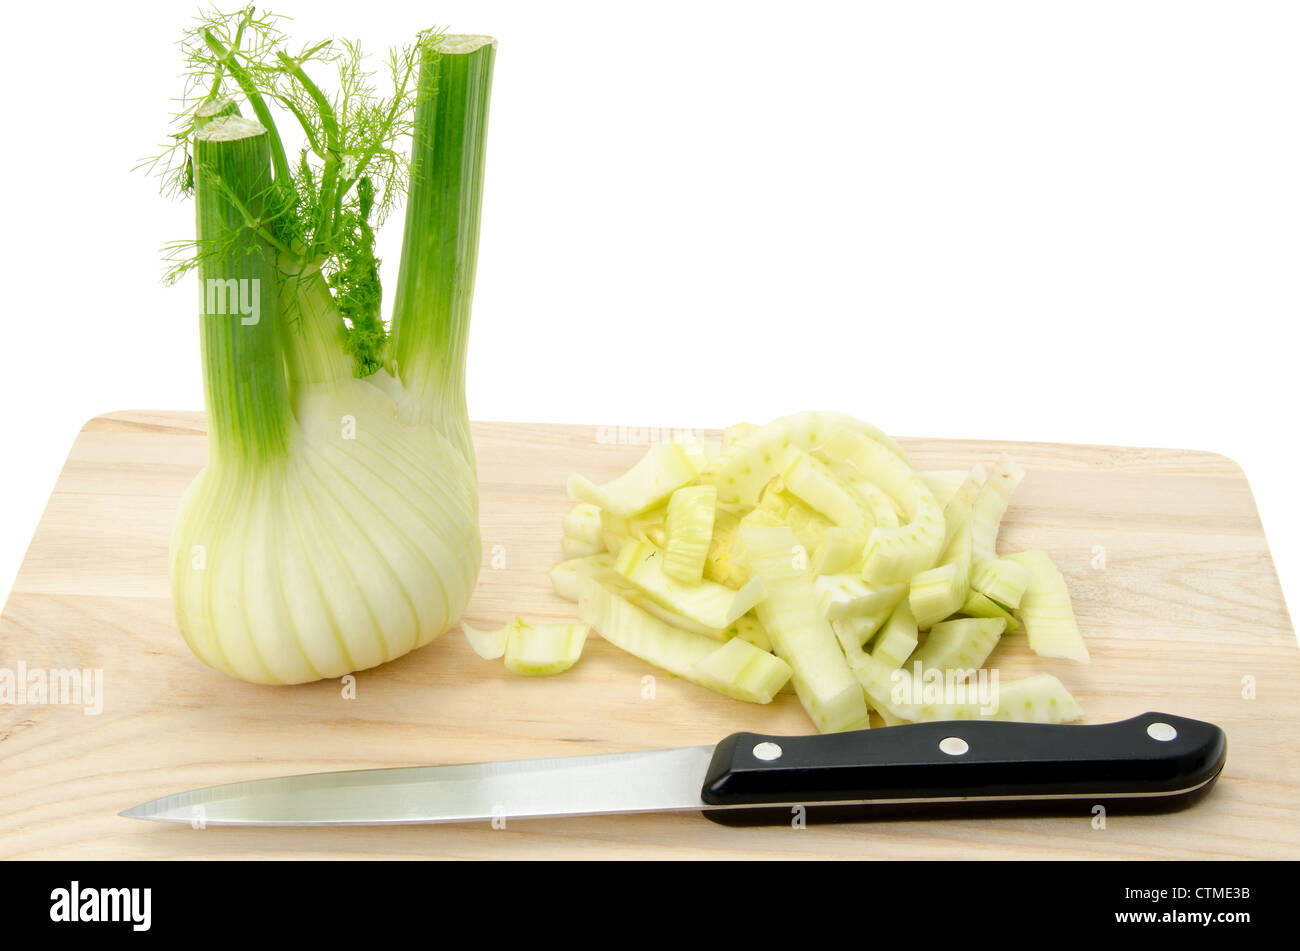 Fennel placed on a wooden cutting board - studio shot with a white background Stock Photo